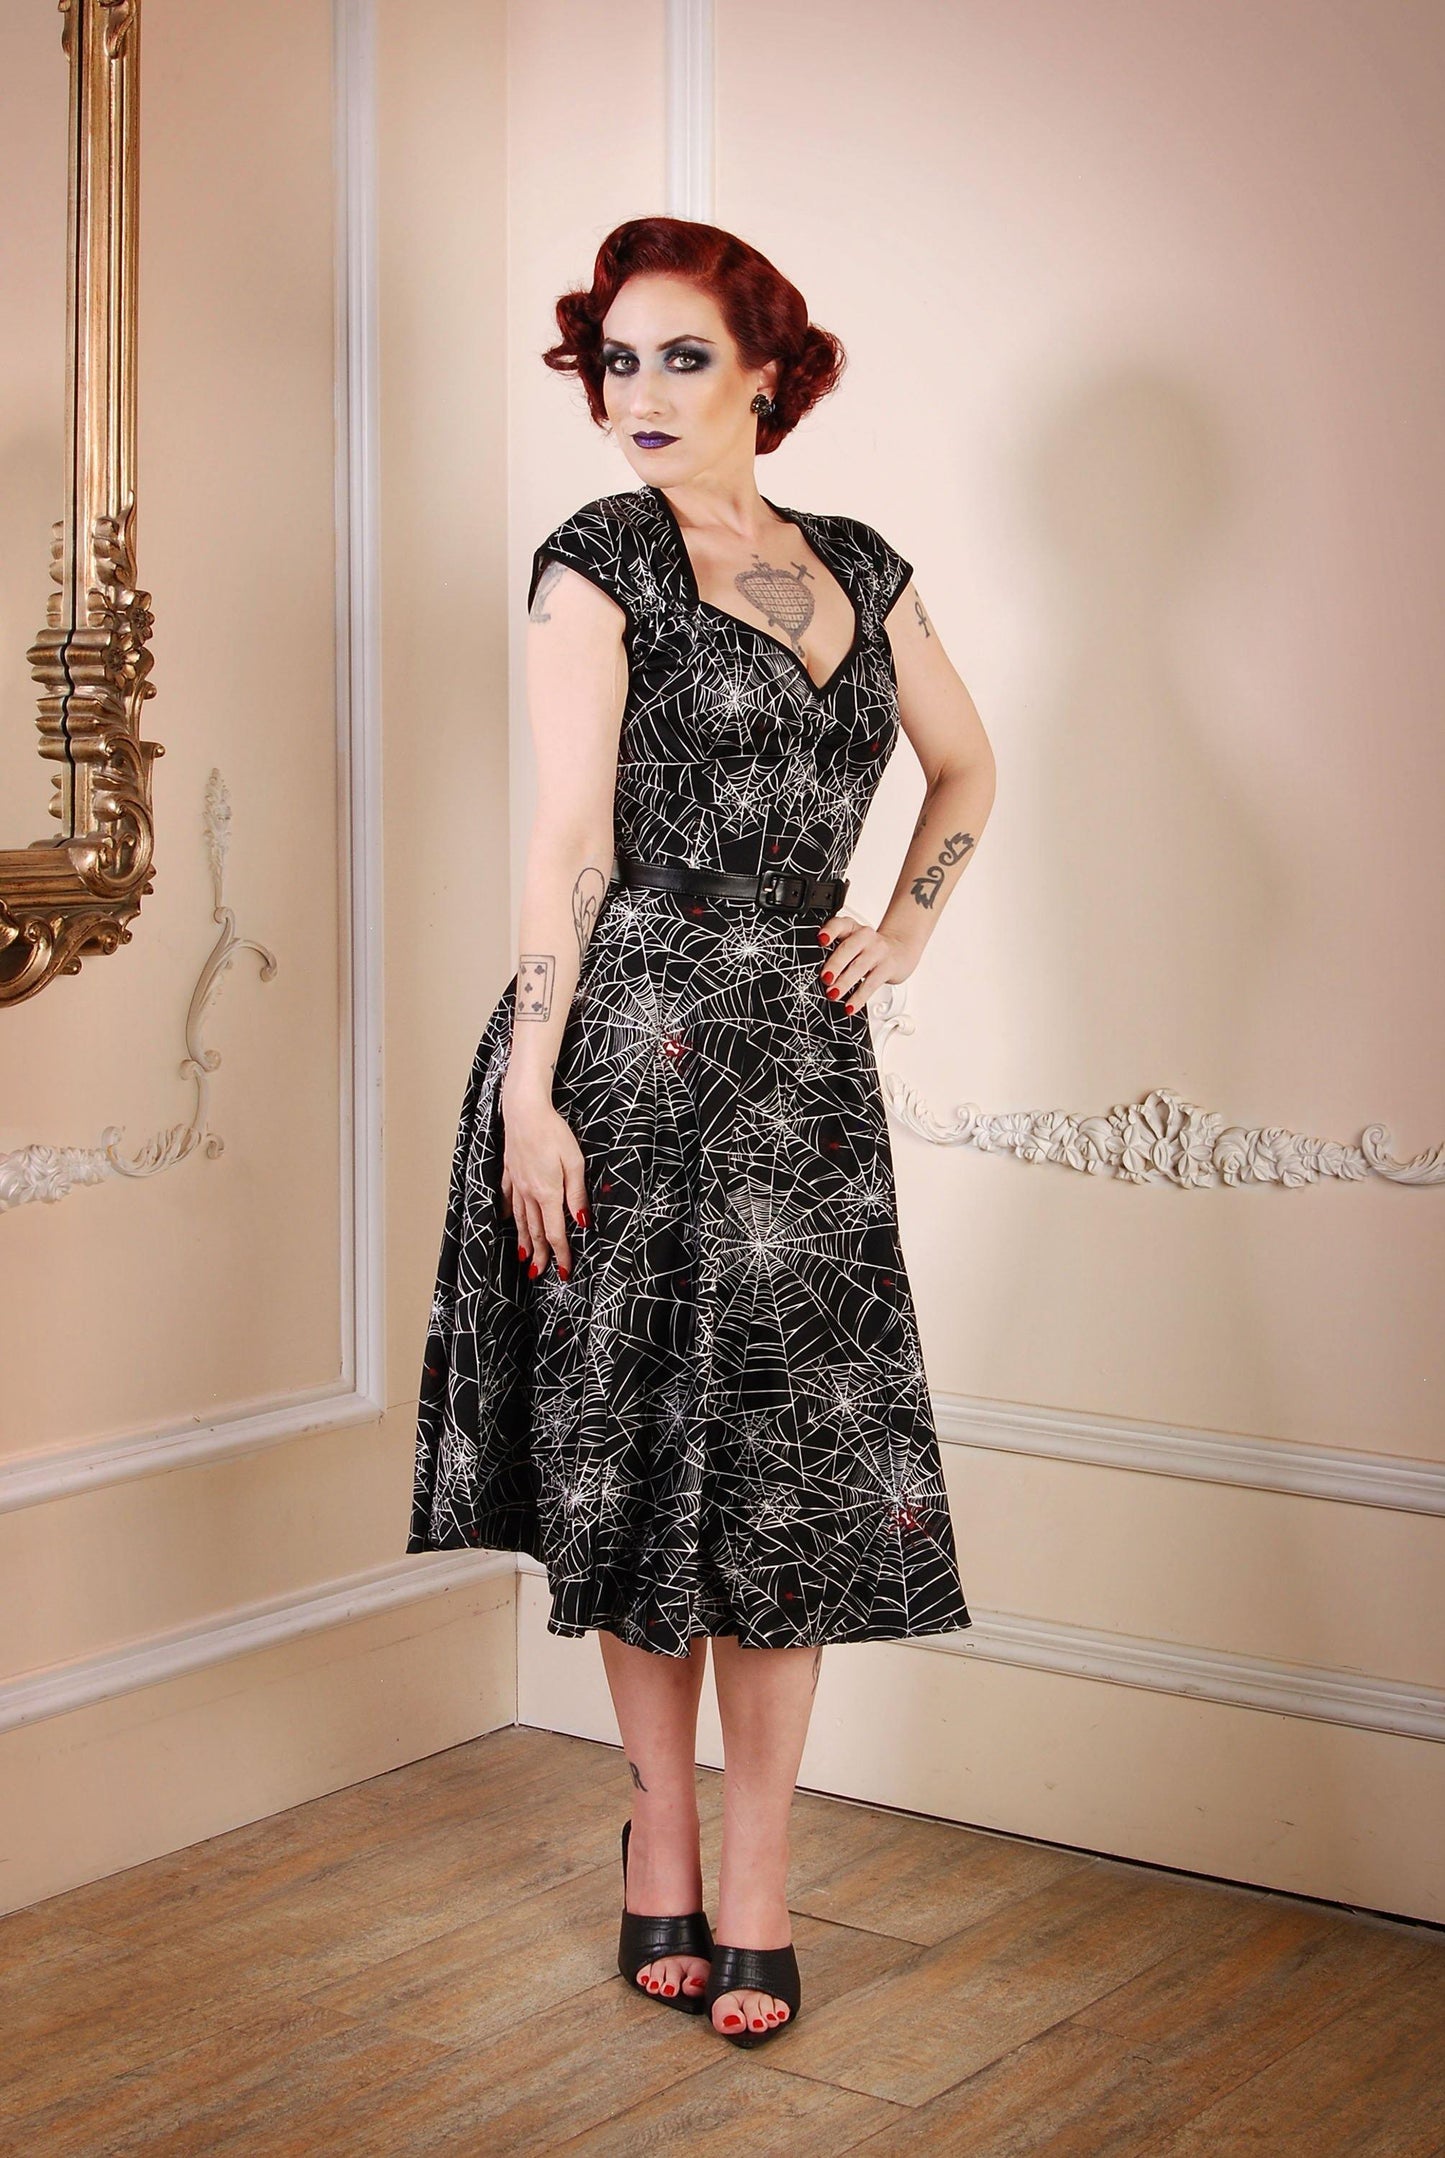 Heidi Vintage A-Line Dress in Black Widow Spiderweb Cotton Sateen | Pinup Couture - pinupgirlclothing.com